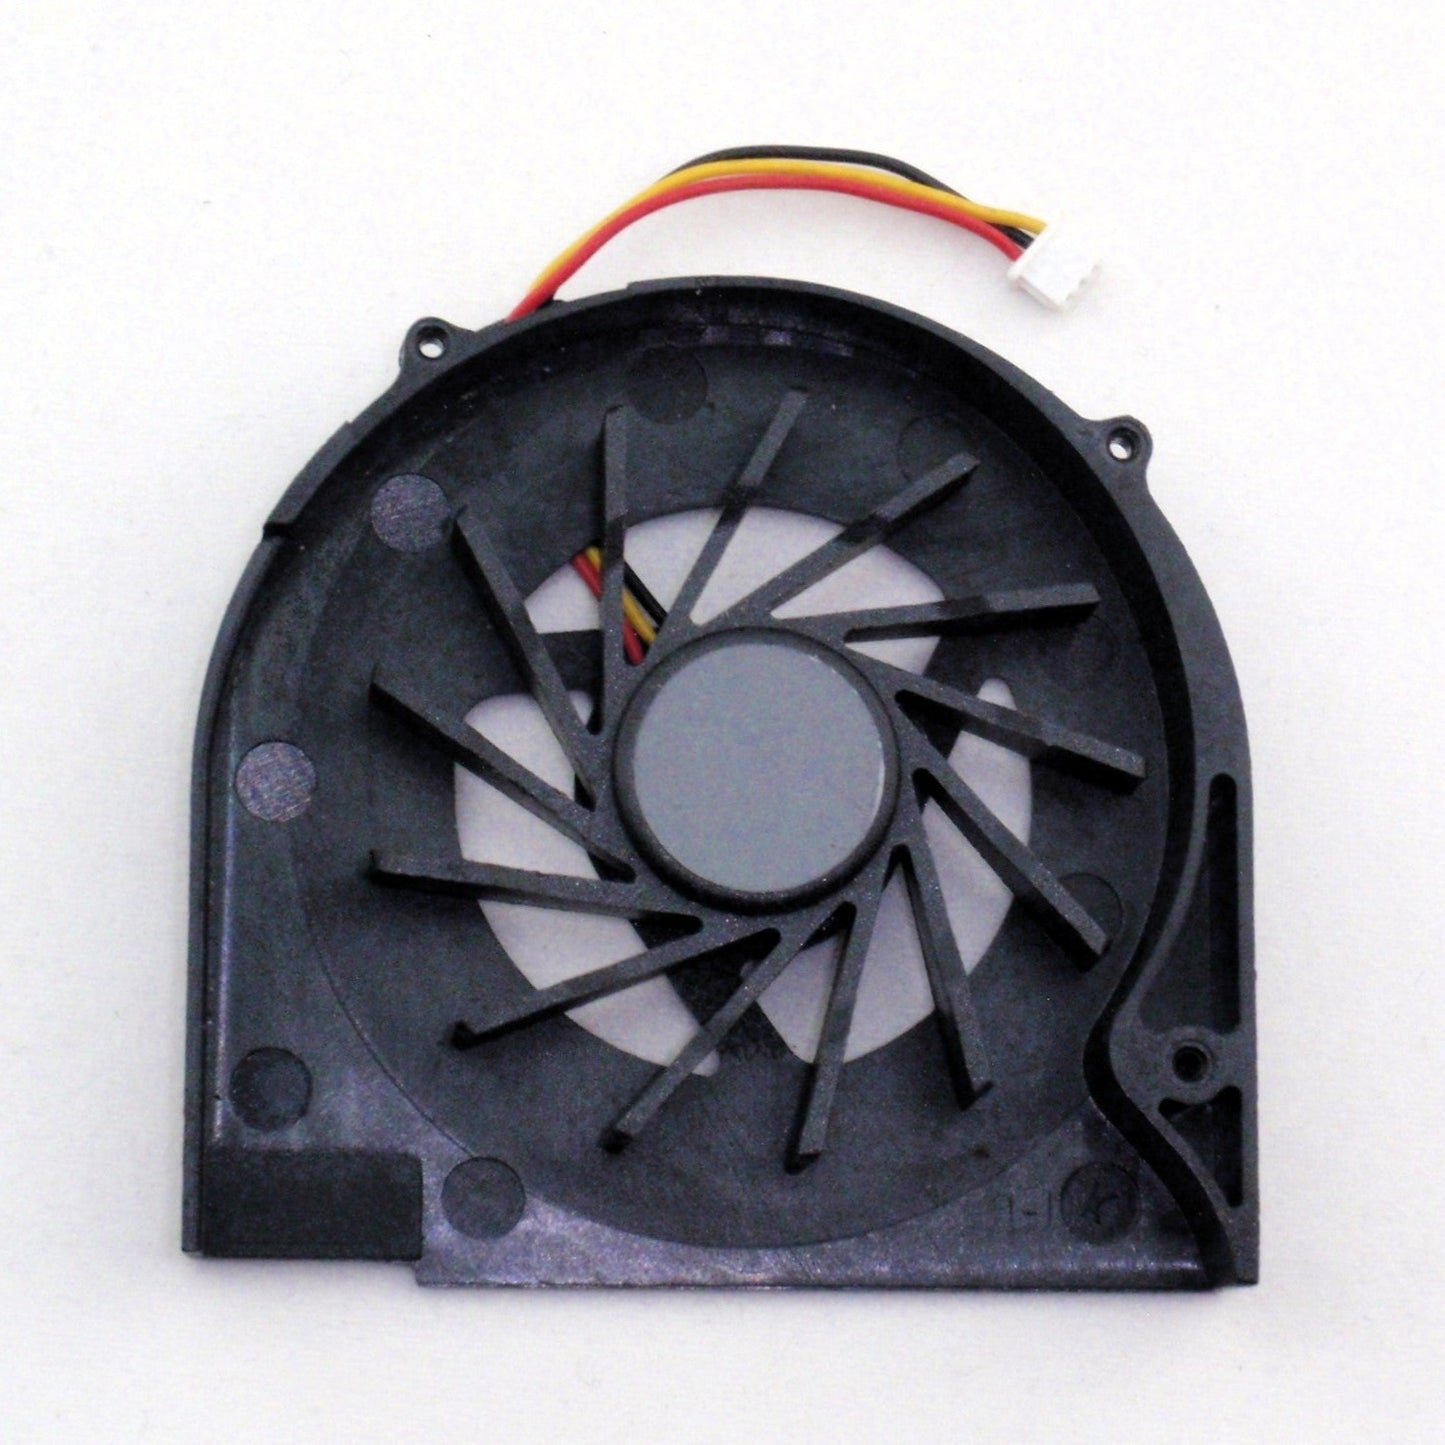 Lenovo New CPU Cooling Thermal Fan 3-Wire IdeaPad Y330 Y330g Y330m GC056510VH-A